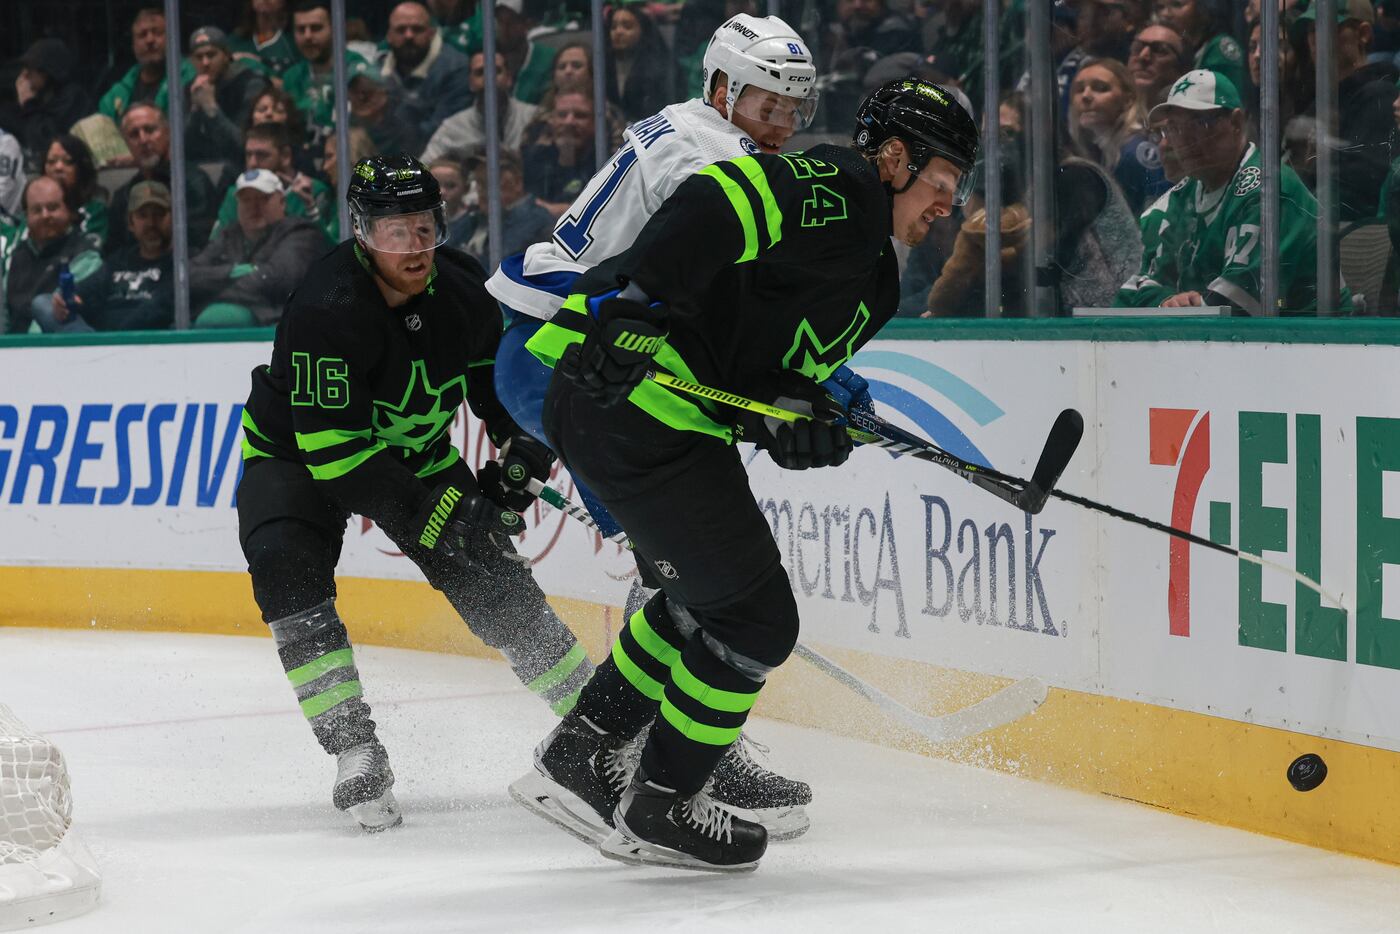 Tough way to go:' Late Lightning goal nixes Scott Wedgewood's strong effort  in Stars loss